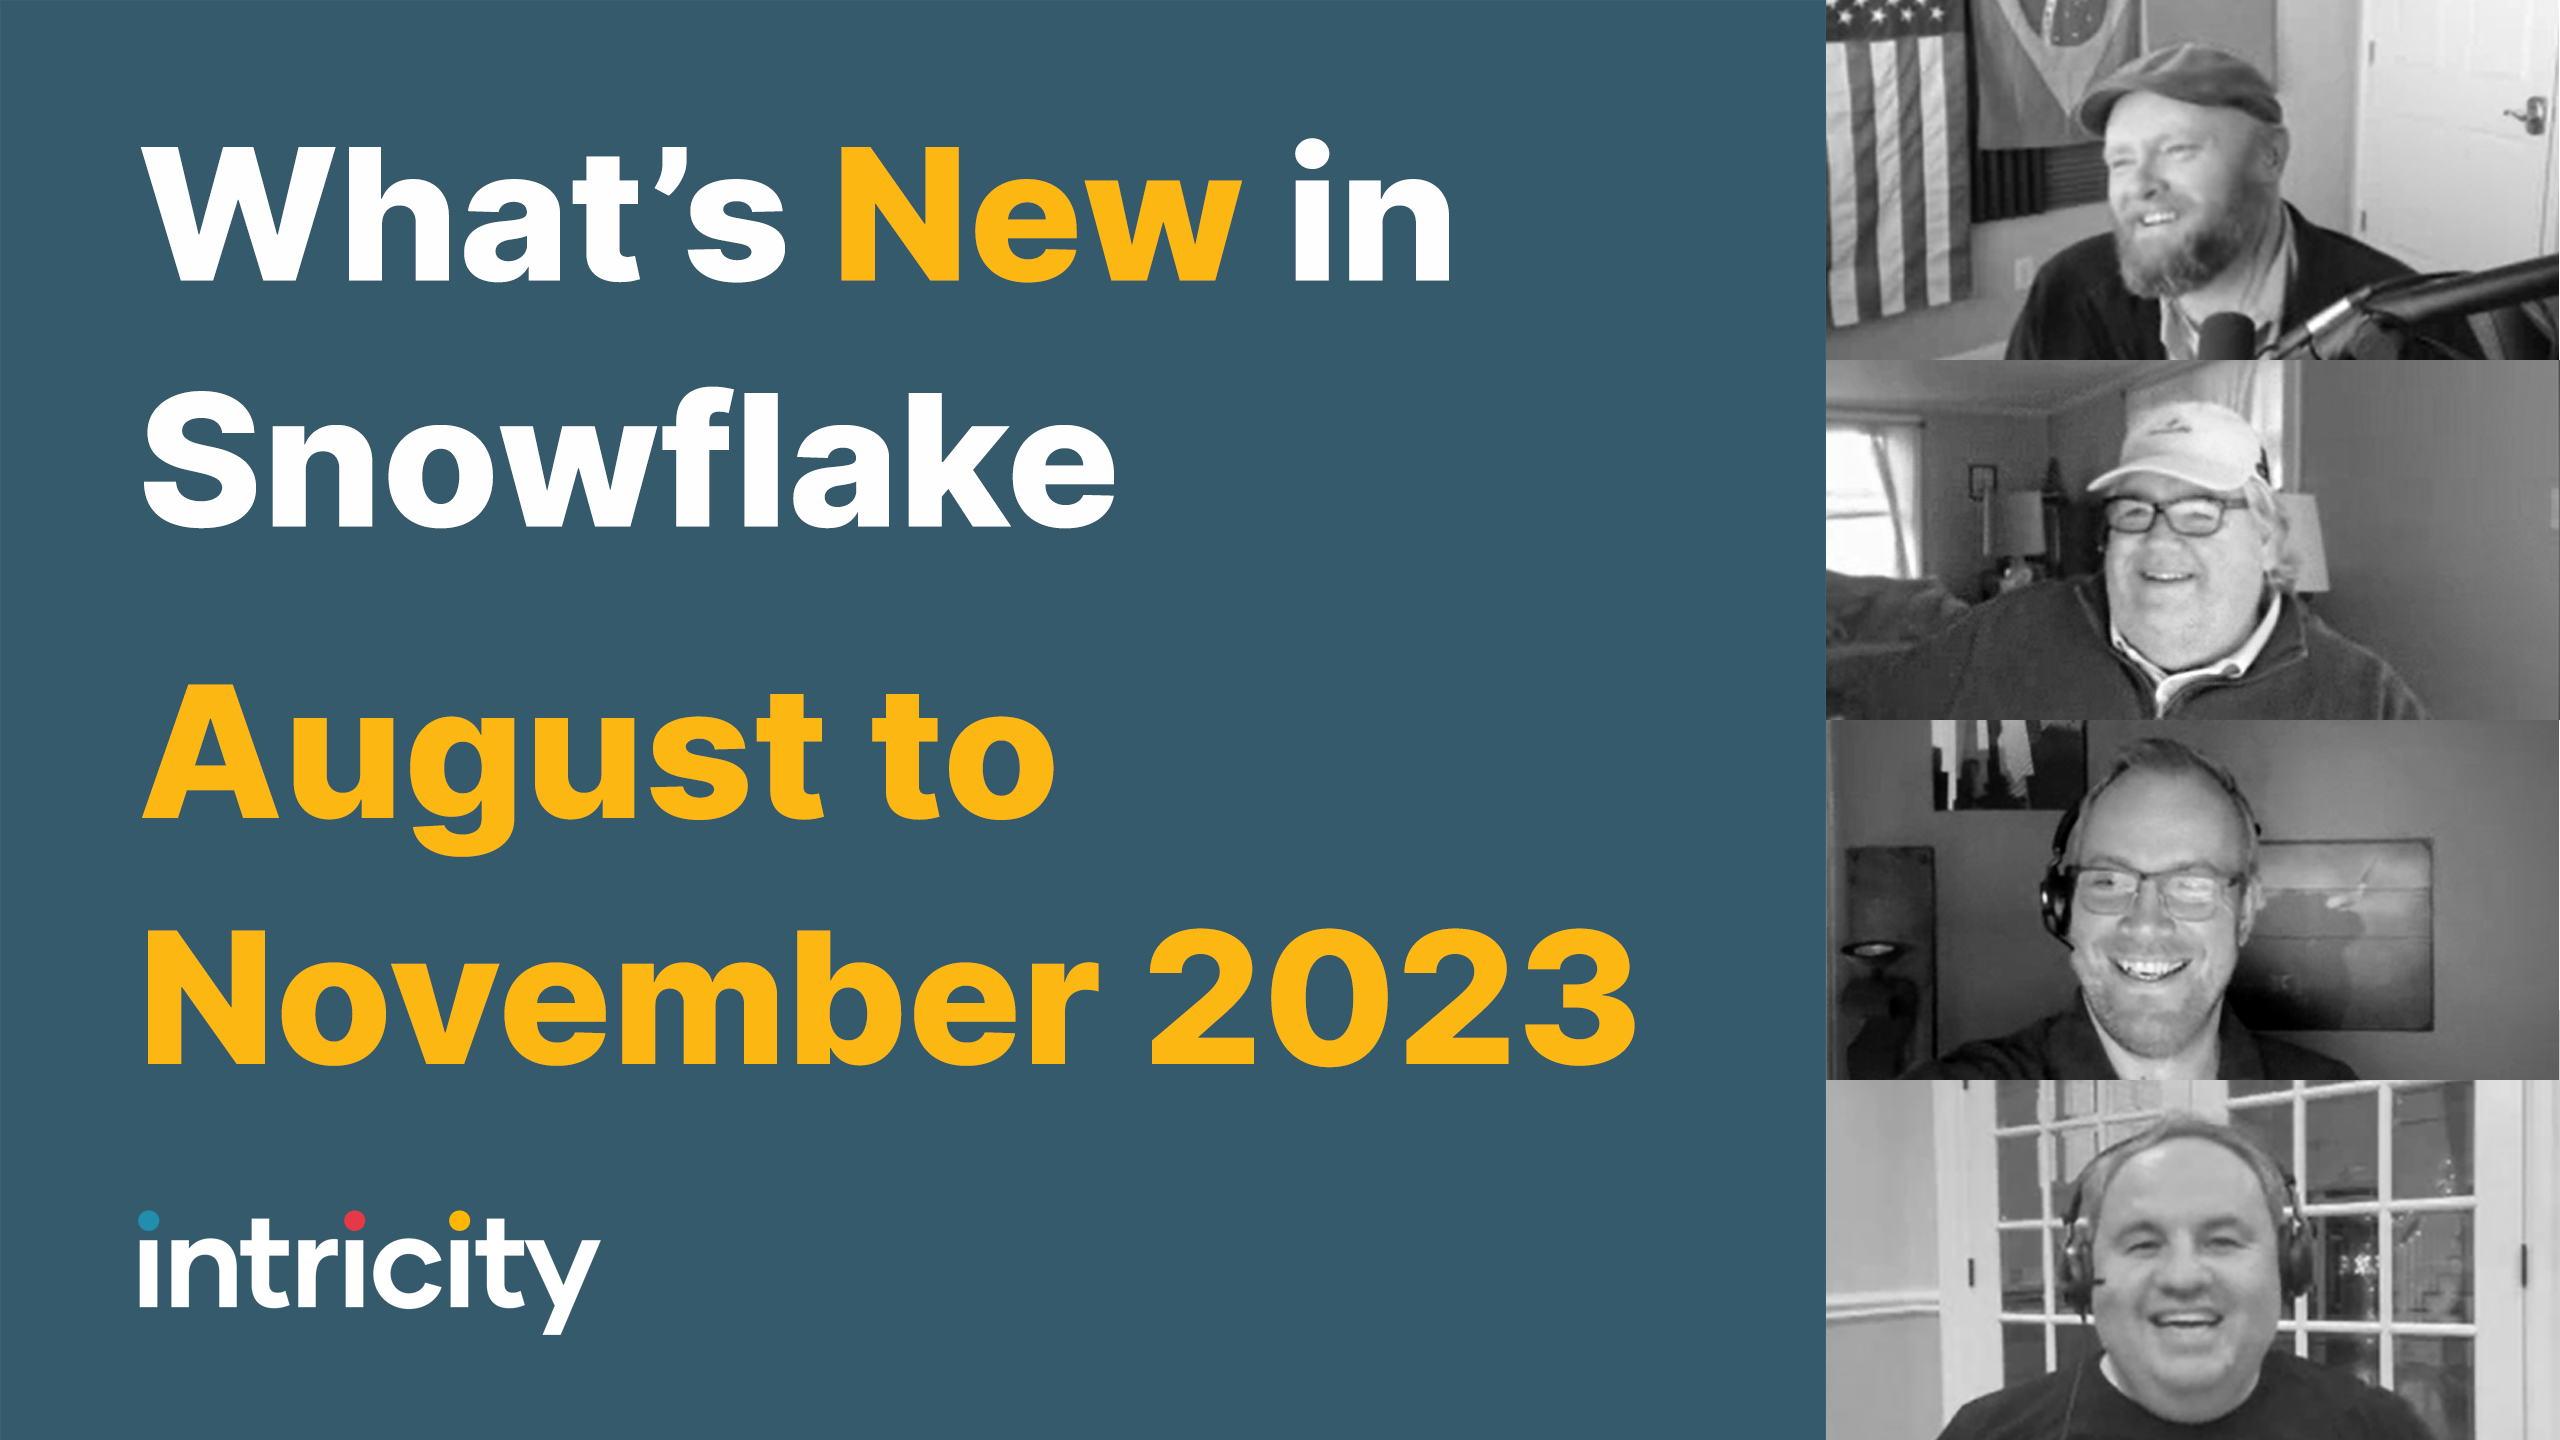 What's New in Snowflake August to November 2023